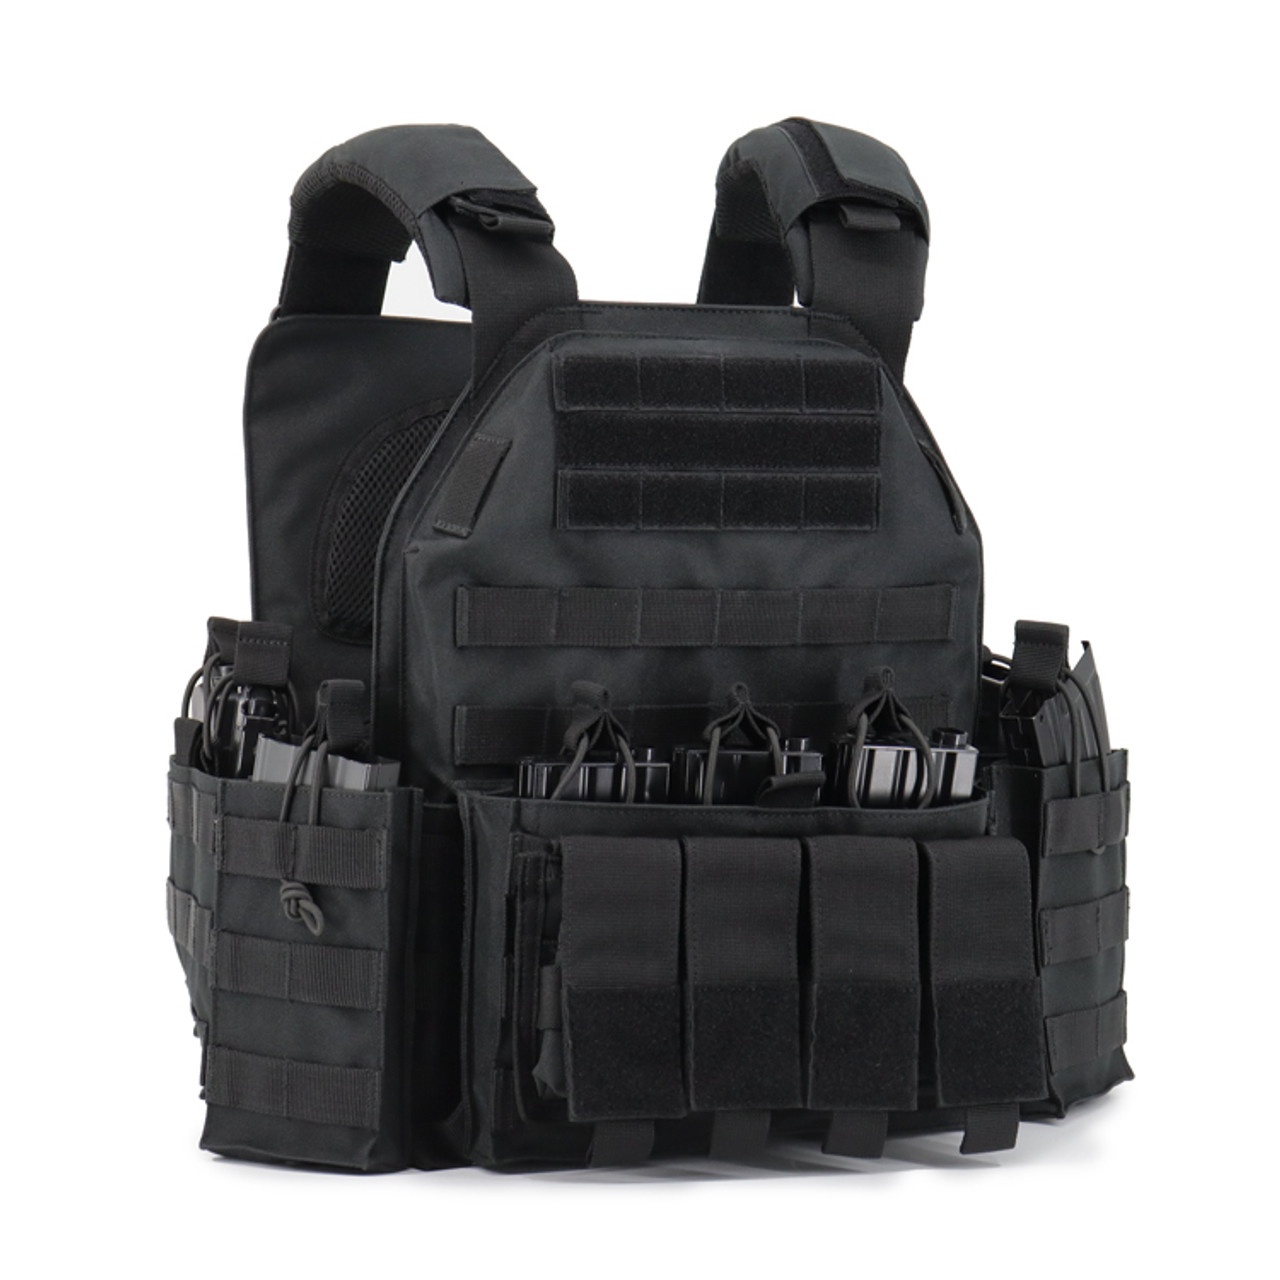 XRT - TACVT8944 Deluxe Plate Carrier - Black